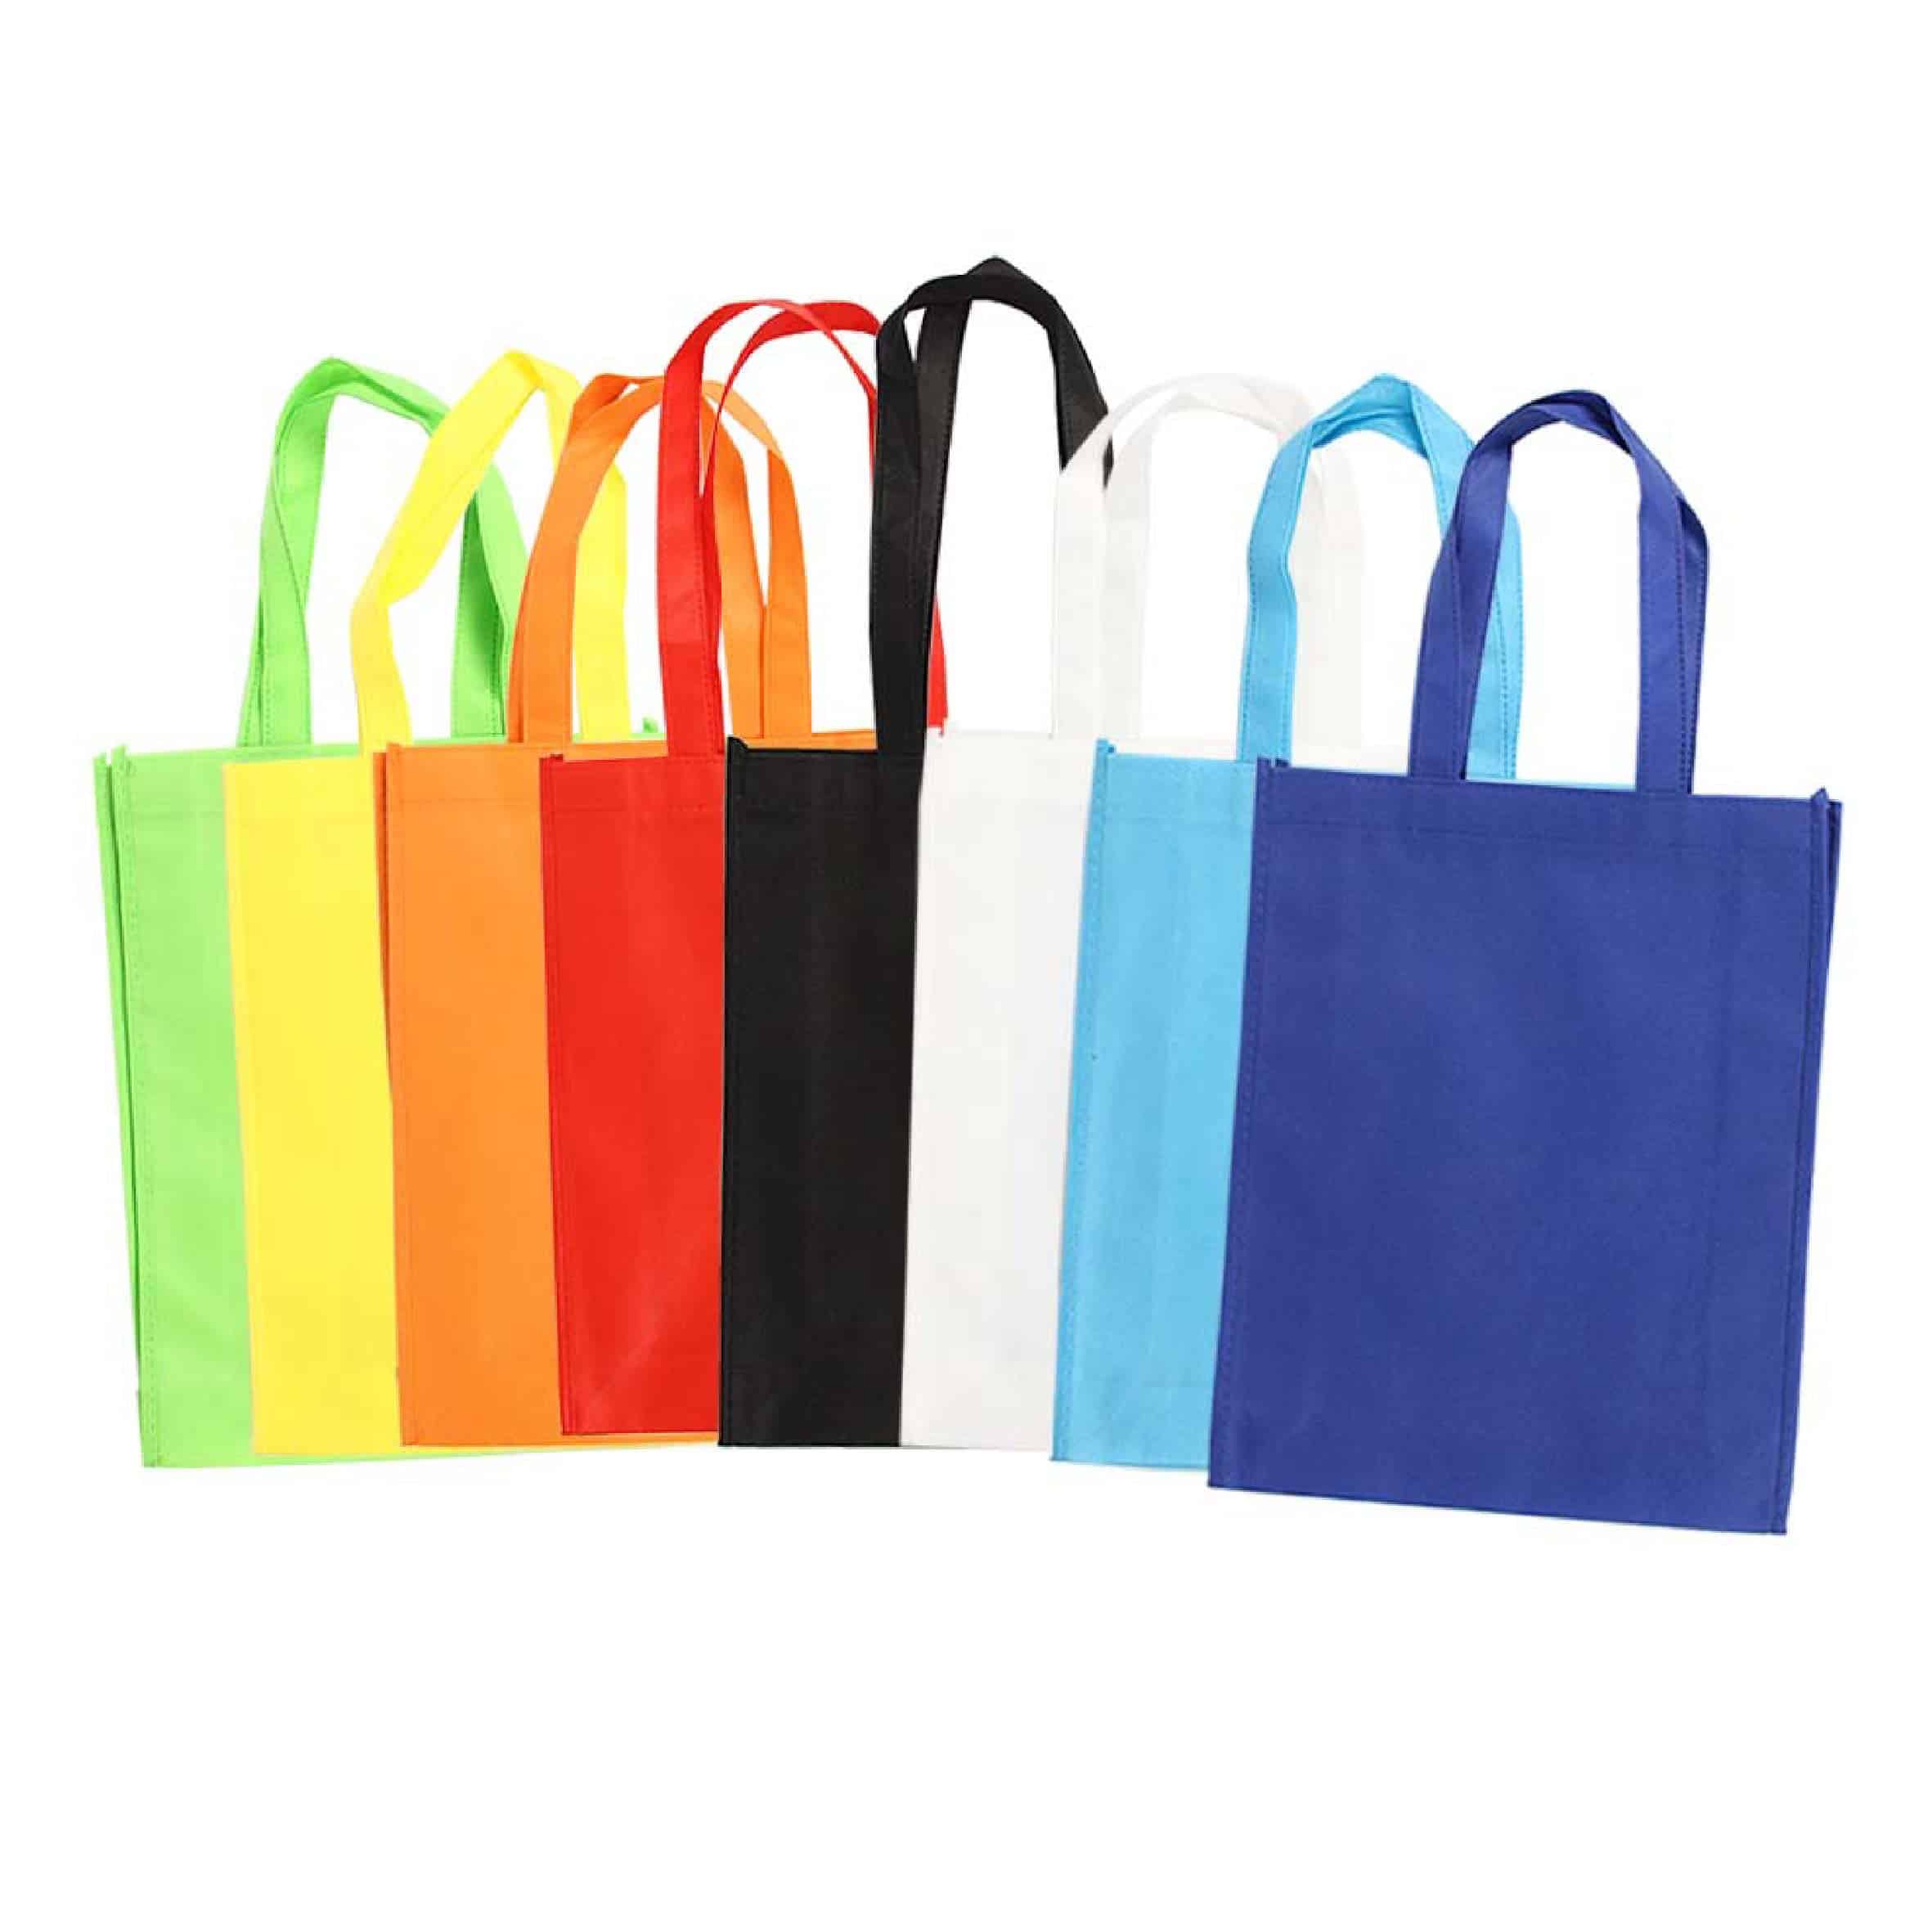 Non Woven Bags by SJ-World Gifts Malaysia Trusted Corporate Gift Supplier